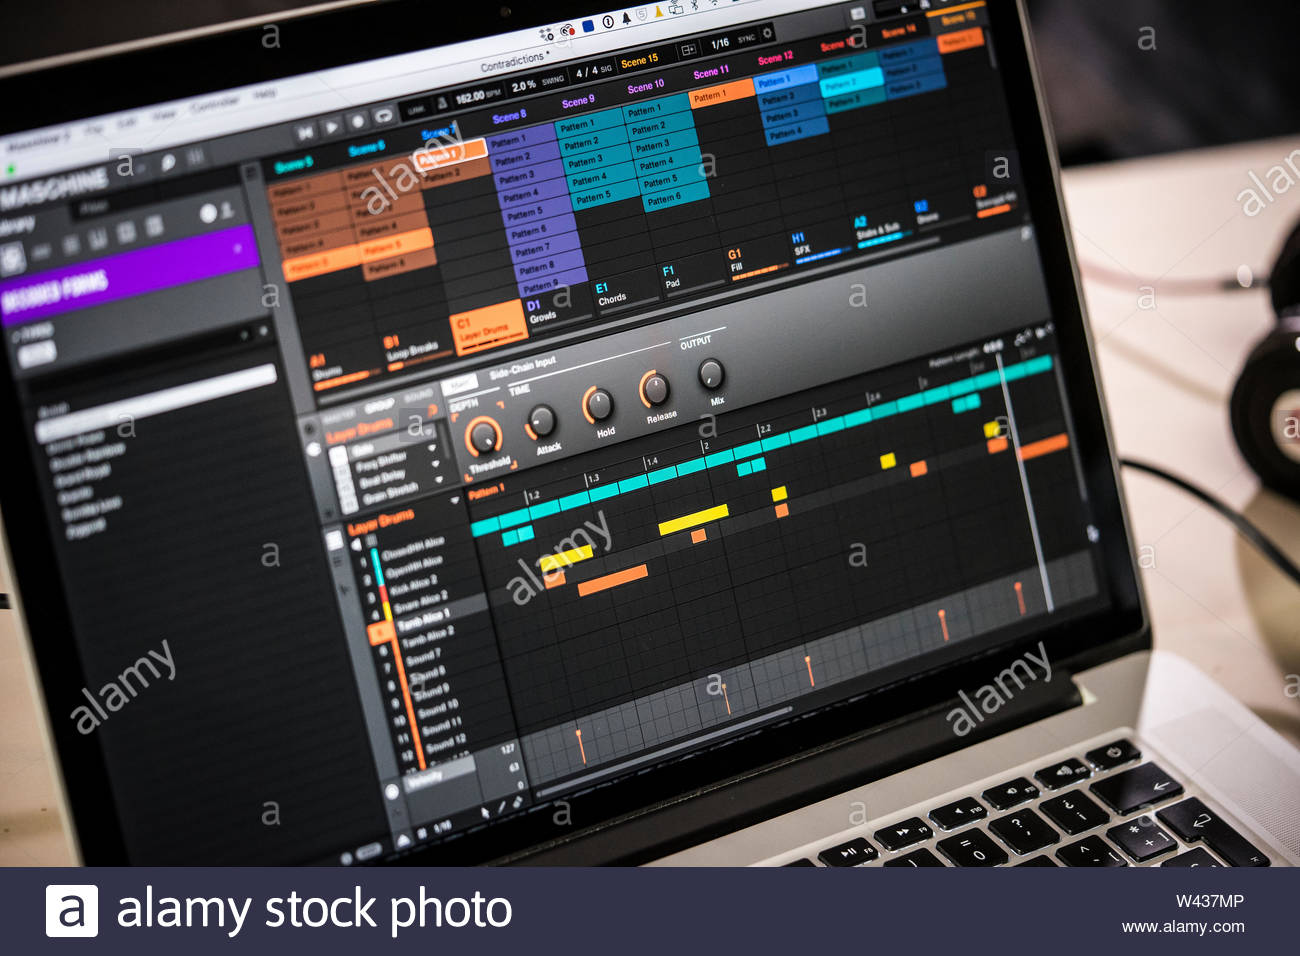 Maschine native instruments for mac os 10.13